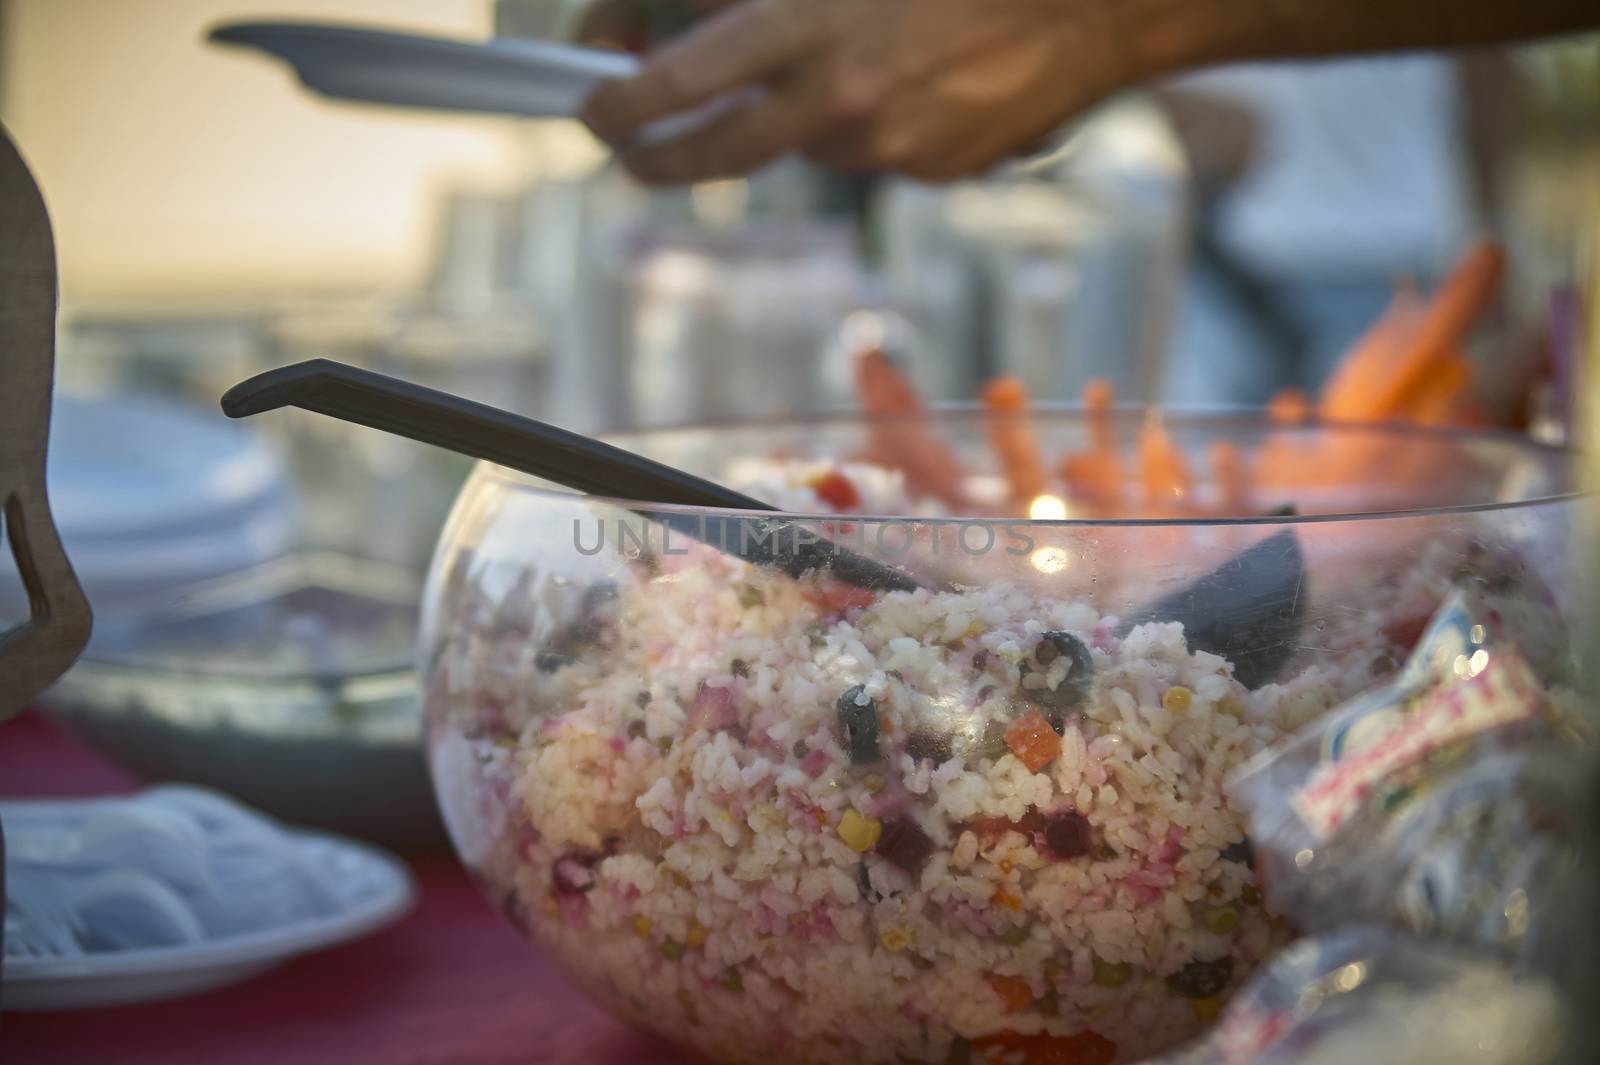 Bowl full of rice salad resting on the table during an aperitif to satisfy the hunger of the banqueting. Typical dish of Italian cuisine.